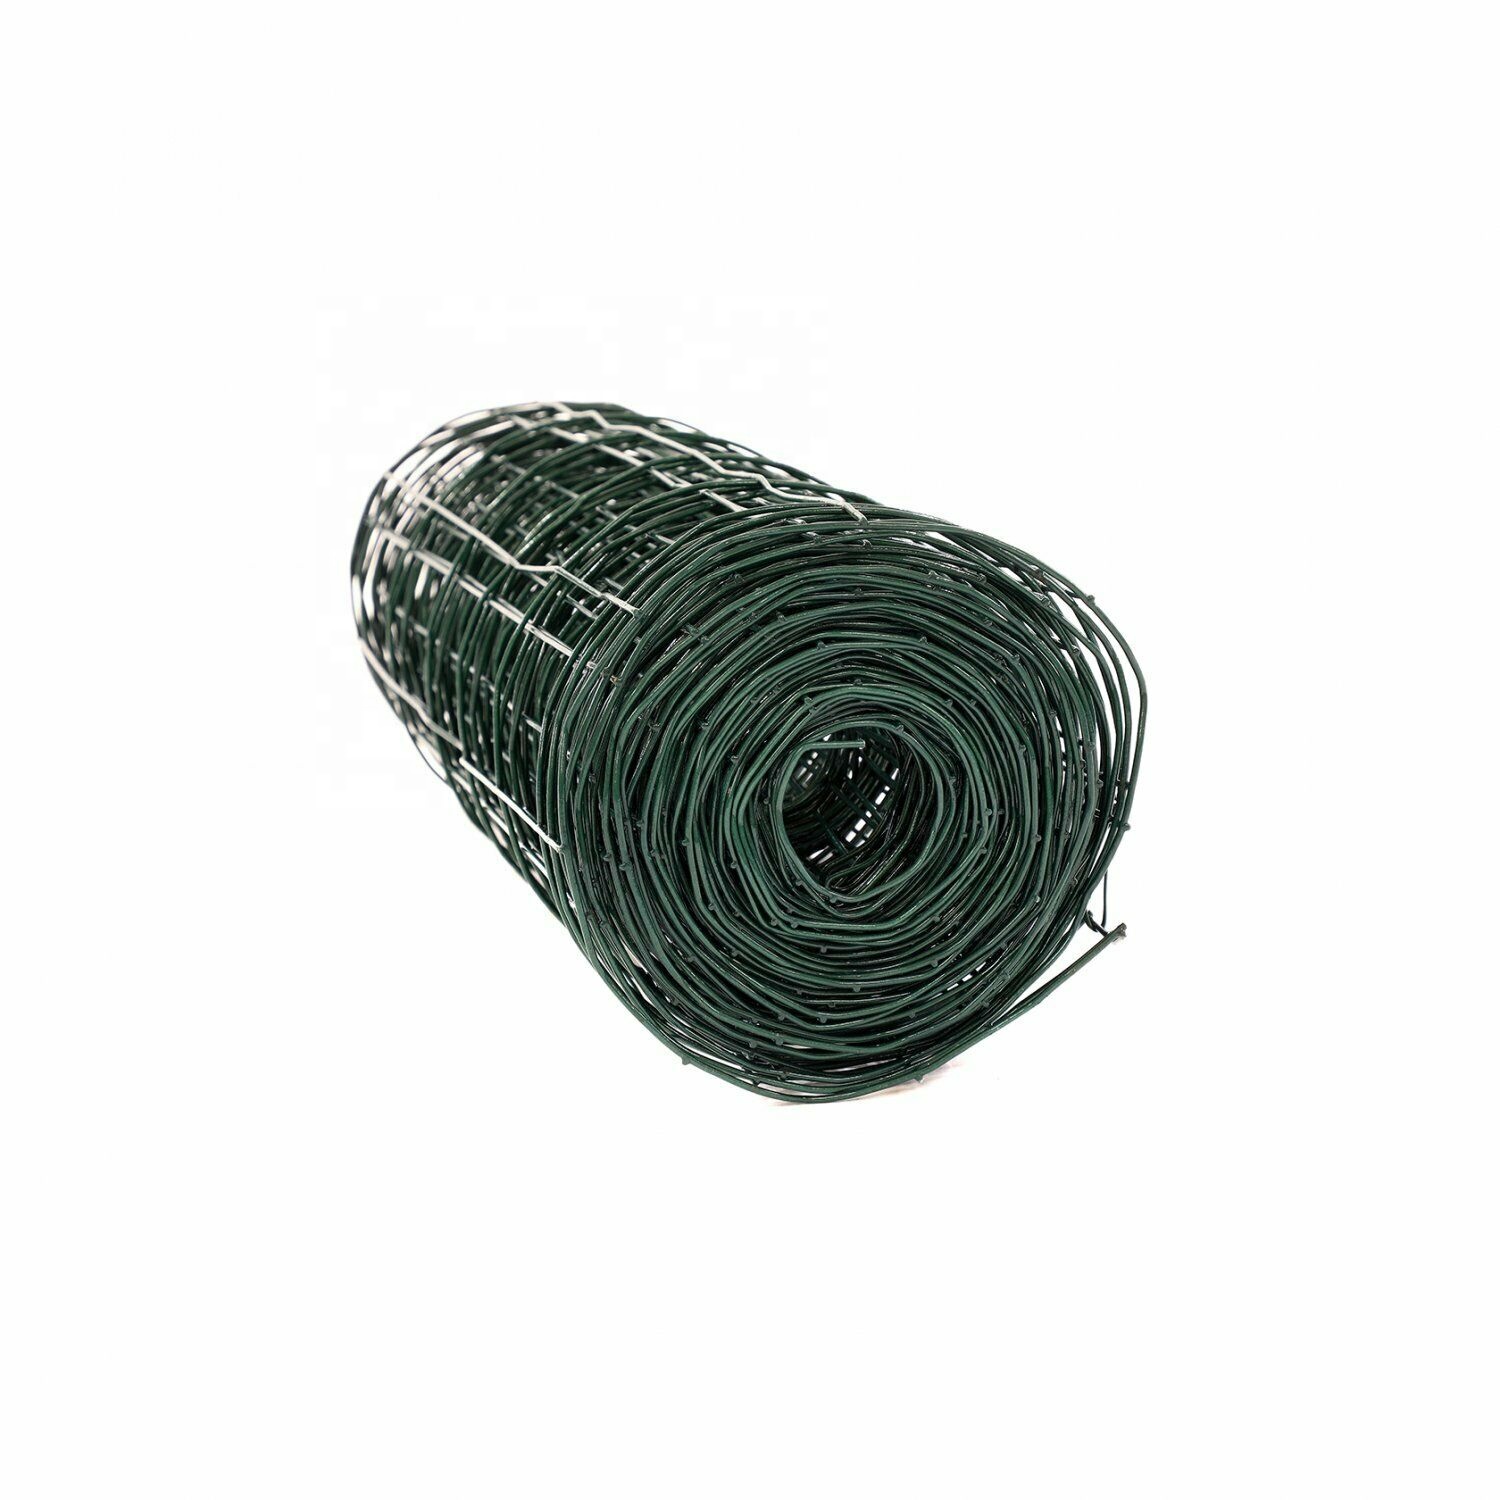 Green PVC Coated Galvanised Steel Wire Mesh Fencing Garden Euro Fence